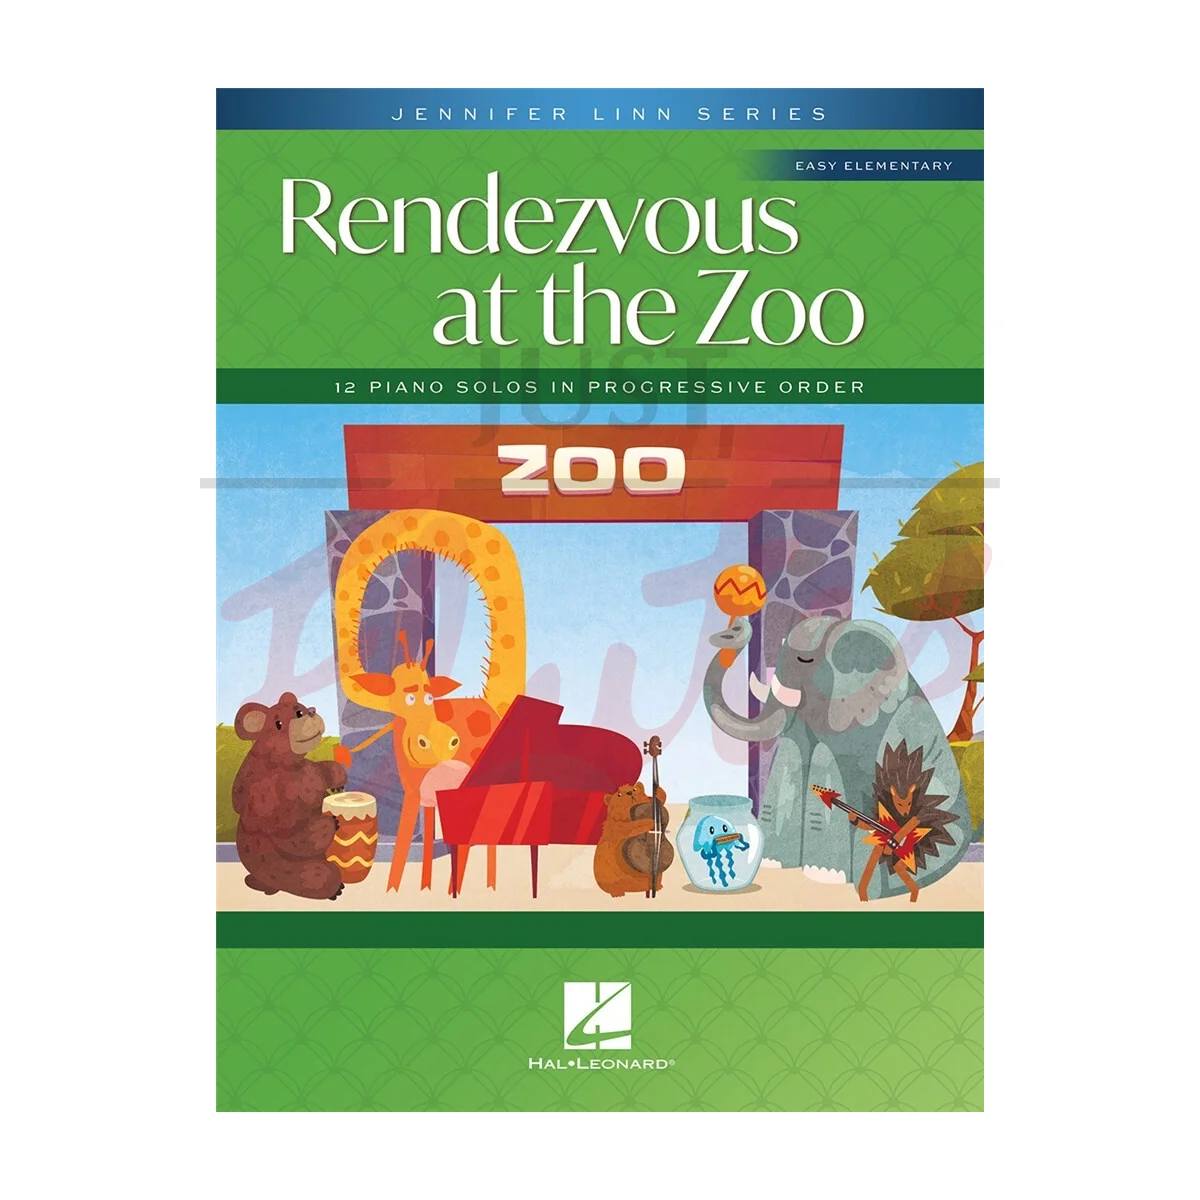 Rendezvous at the Zoo: 12 Piano Solos in Progressive Order